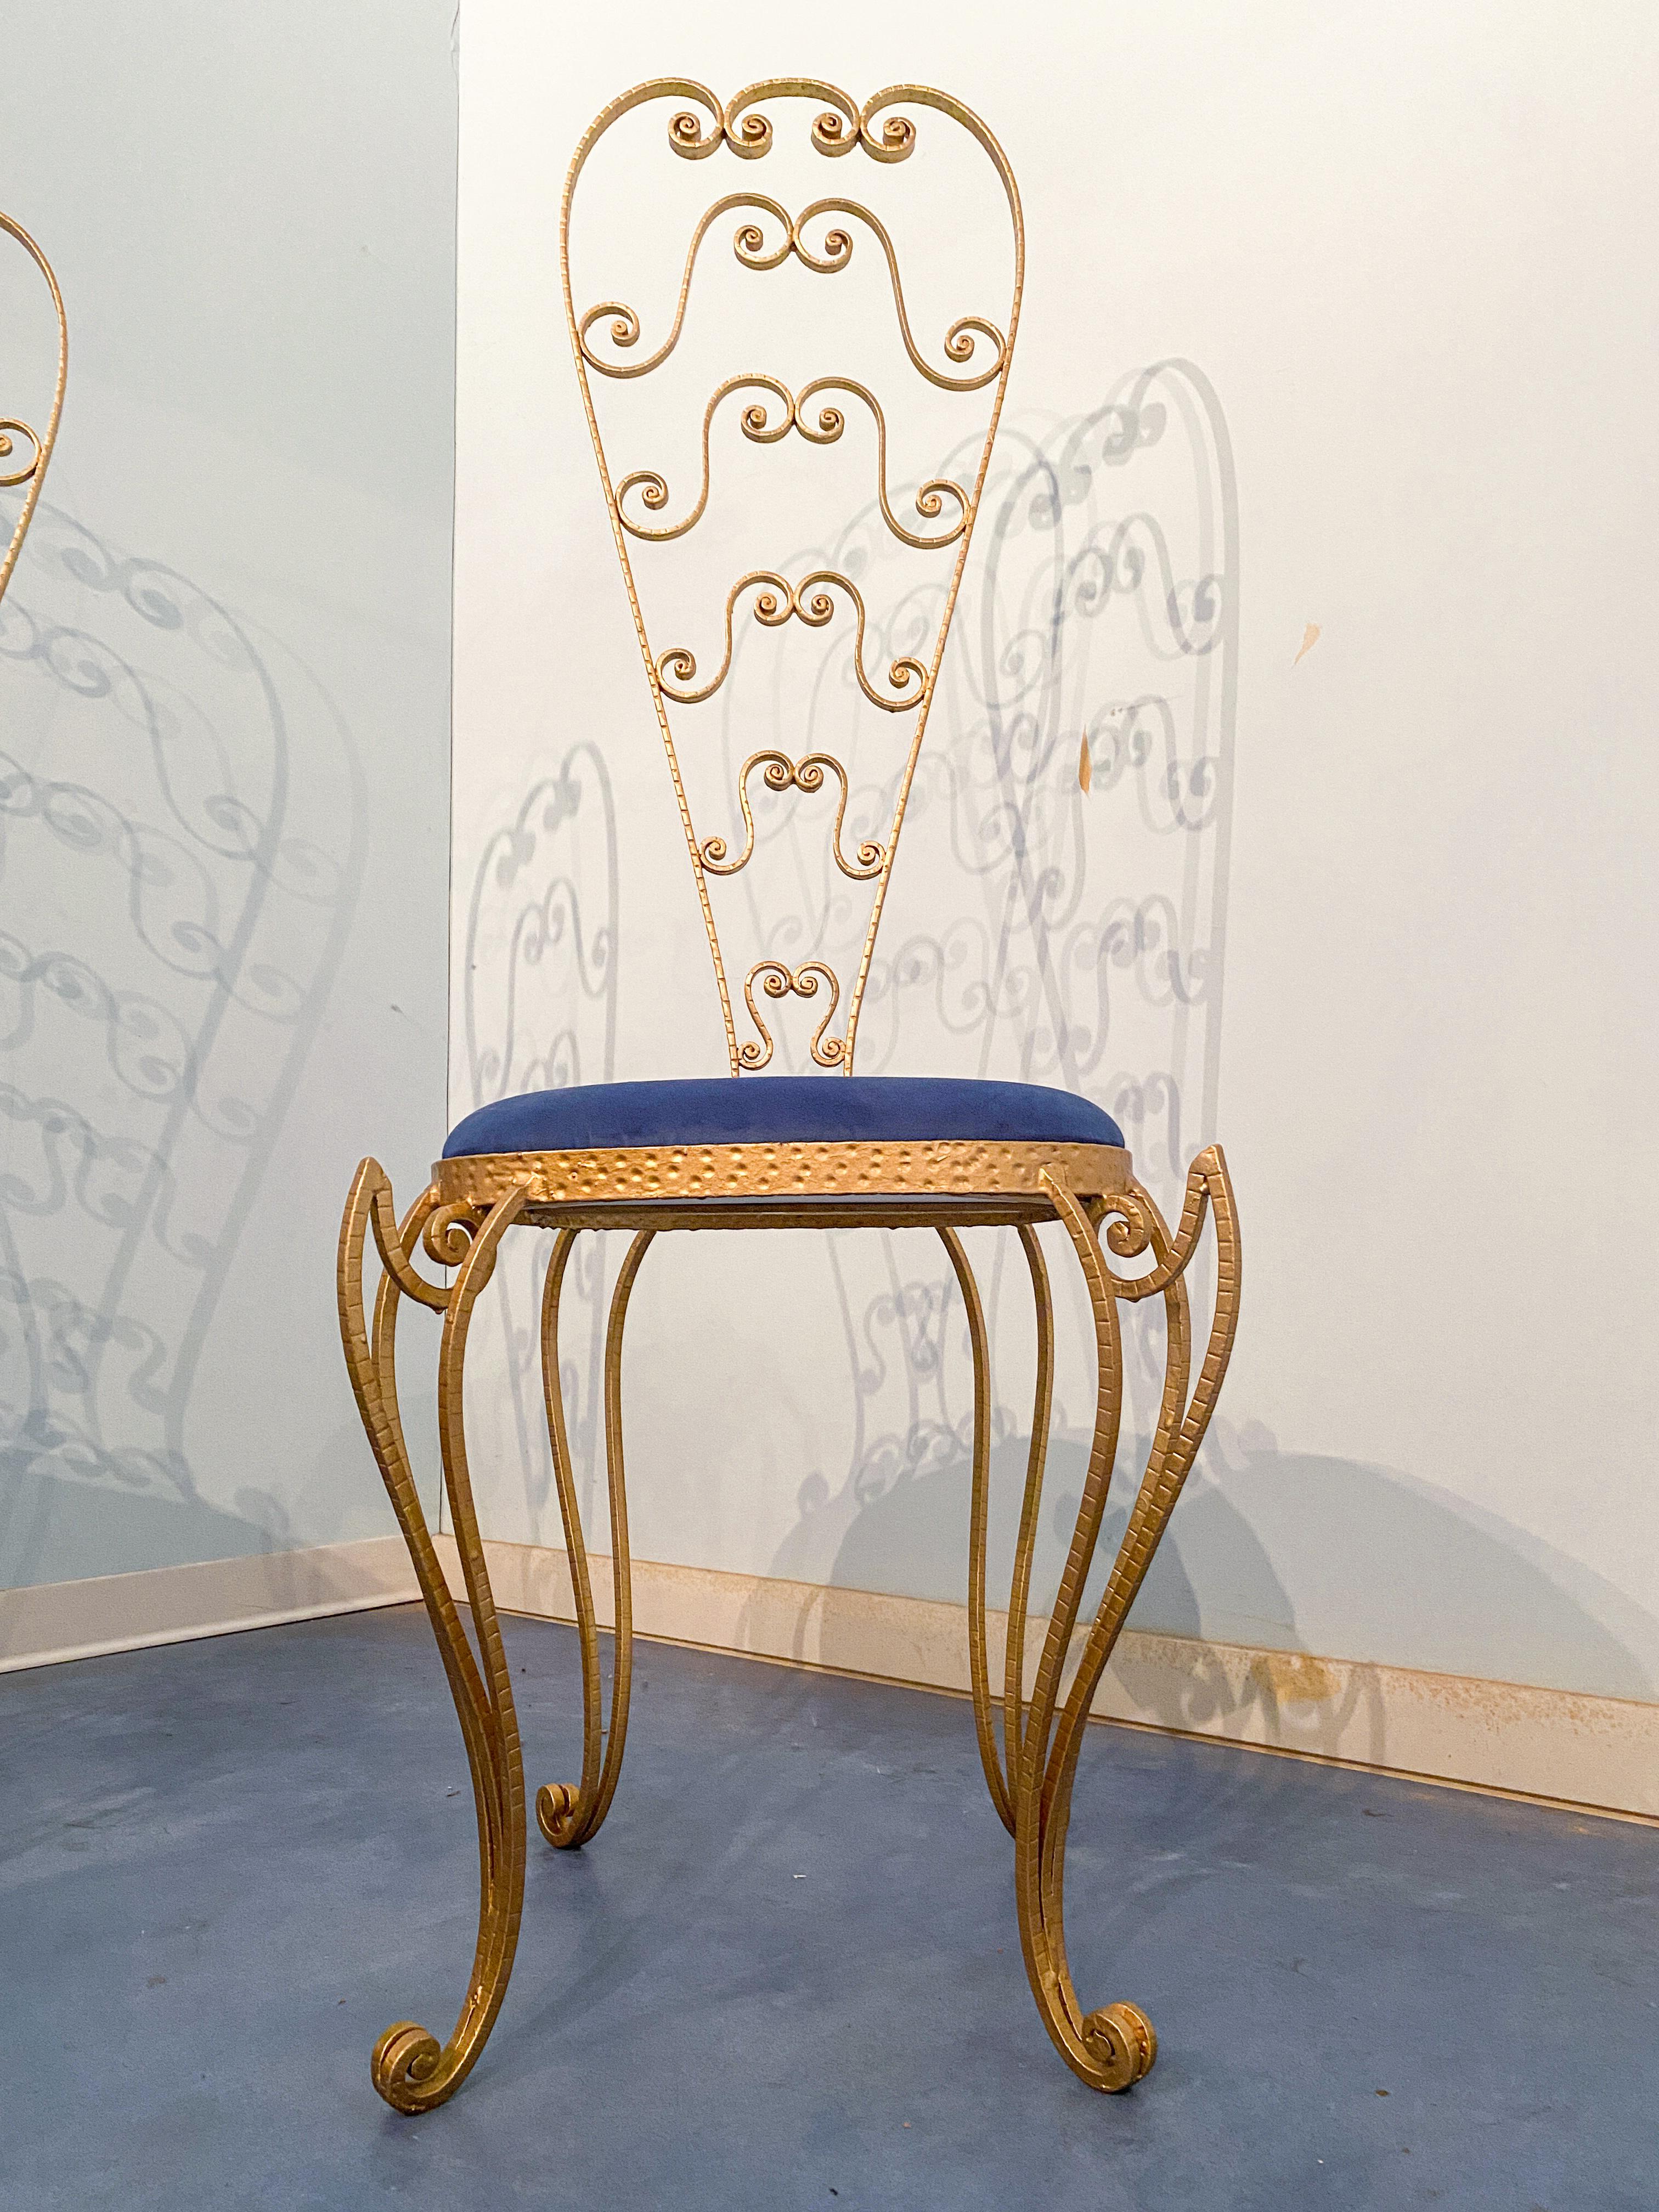 Apair of stunning Italian Mid-Century Modern chairs, look no further than these Luigi Colli vanity chairs. Made from gold gilded iron and featuring a high backrest, these chairs are as beautiful as they are functional. The deep blue microfiber